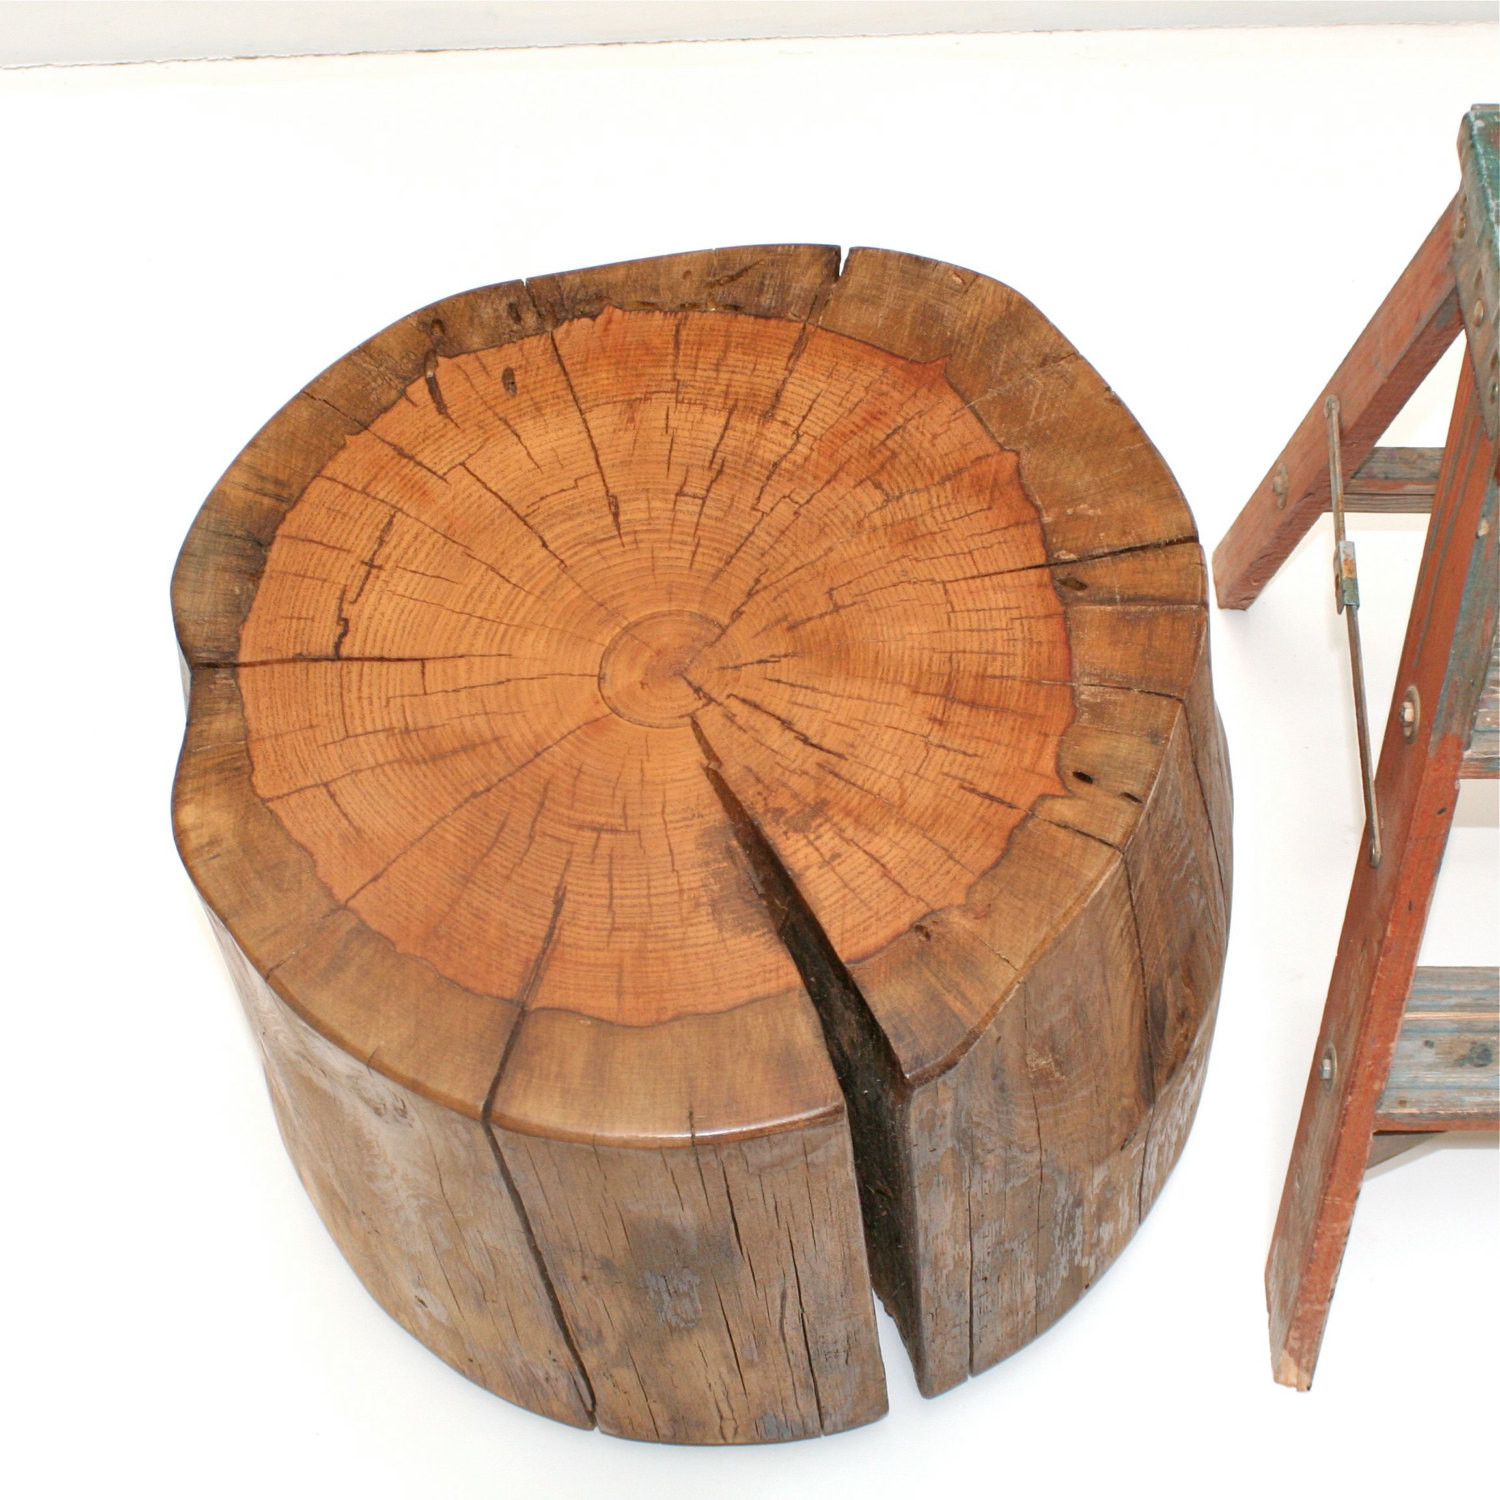 Best ideas about Tree Stump Coffee Table
. Save or Pin Wood Tree Stump Coffee Table on Casters by Now.